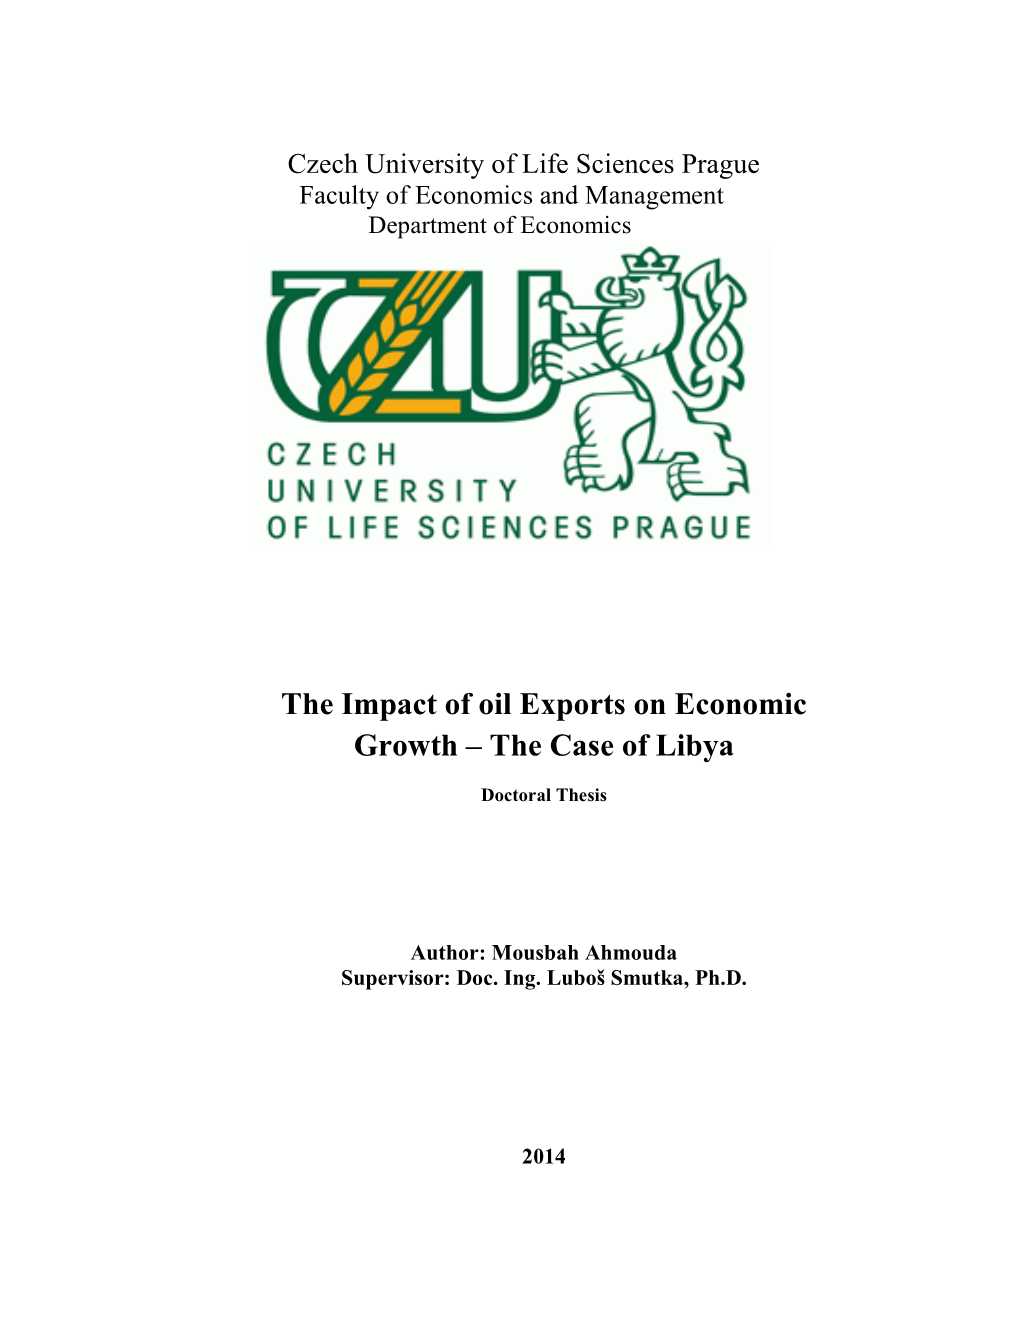 The Impact of Oil Exports on Economic Growth – the Case of Libya